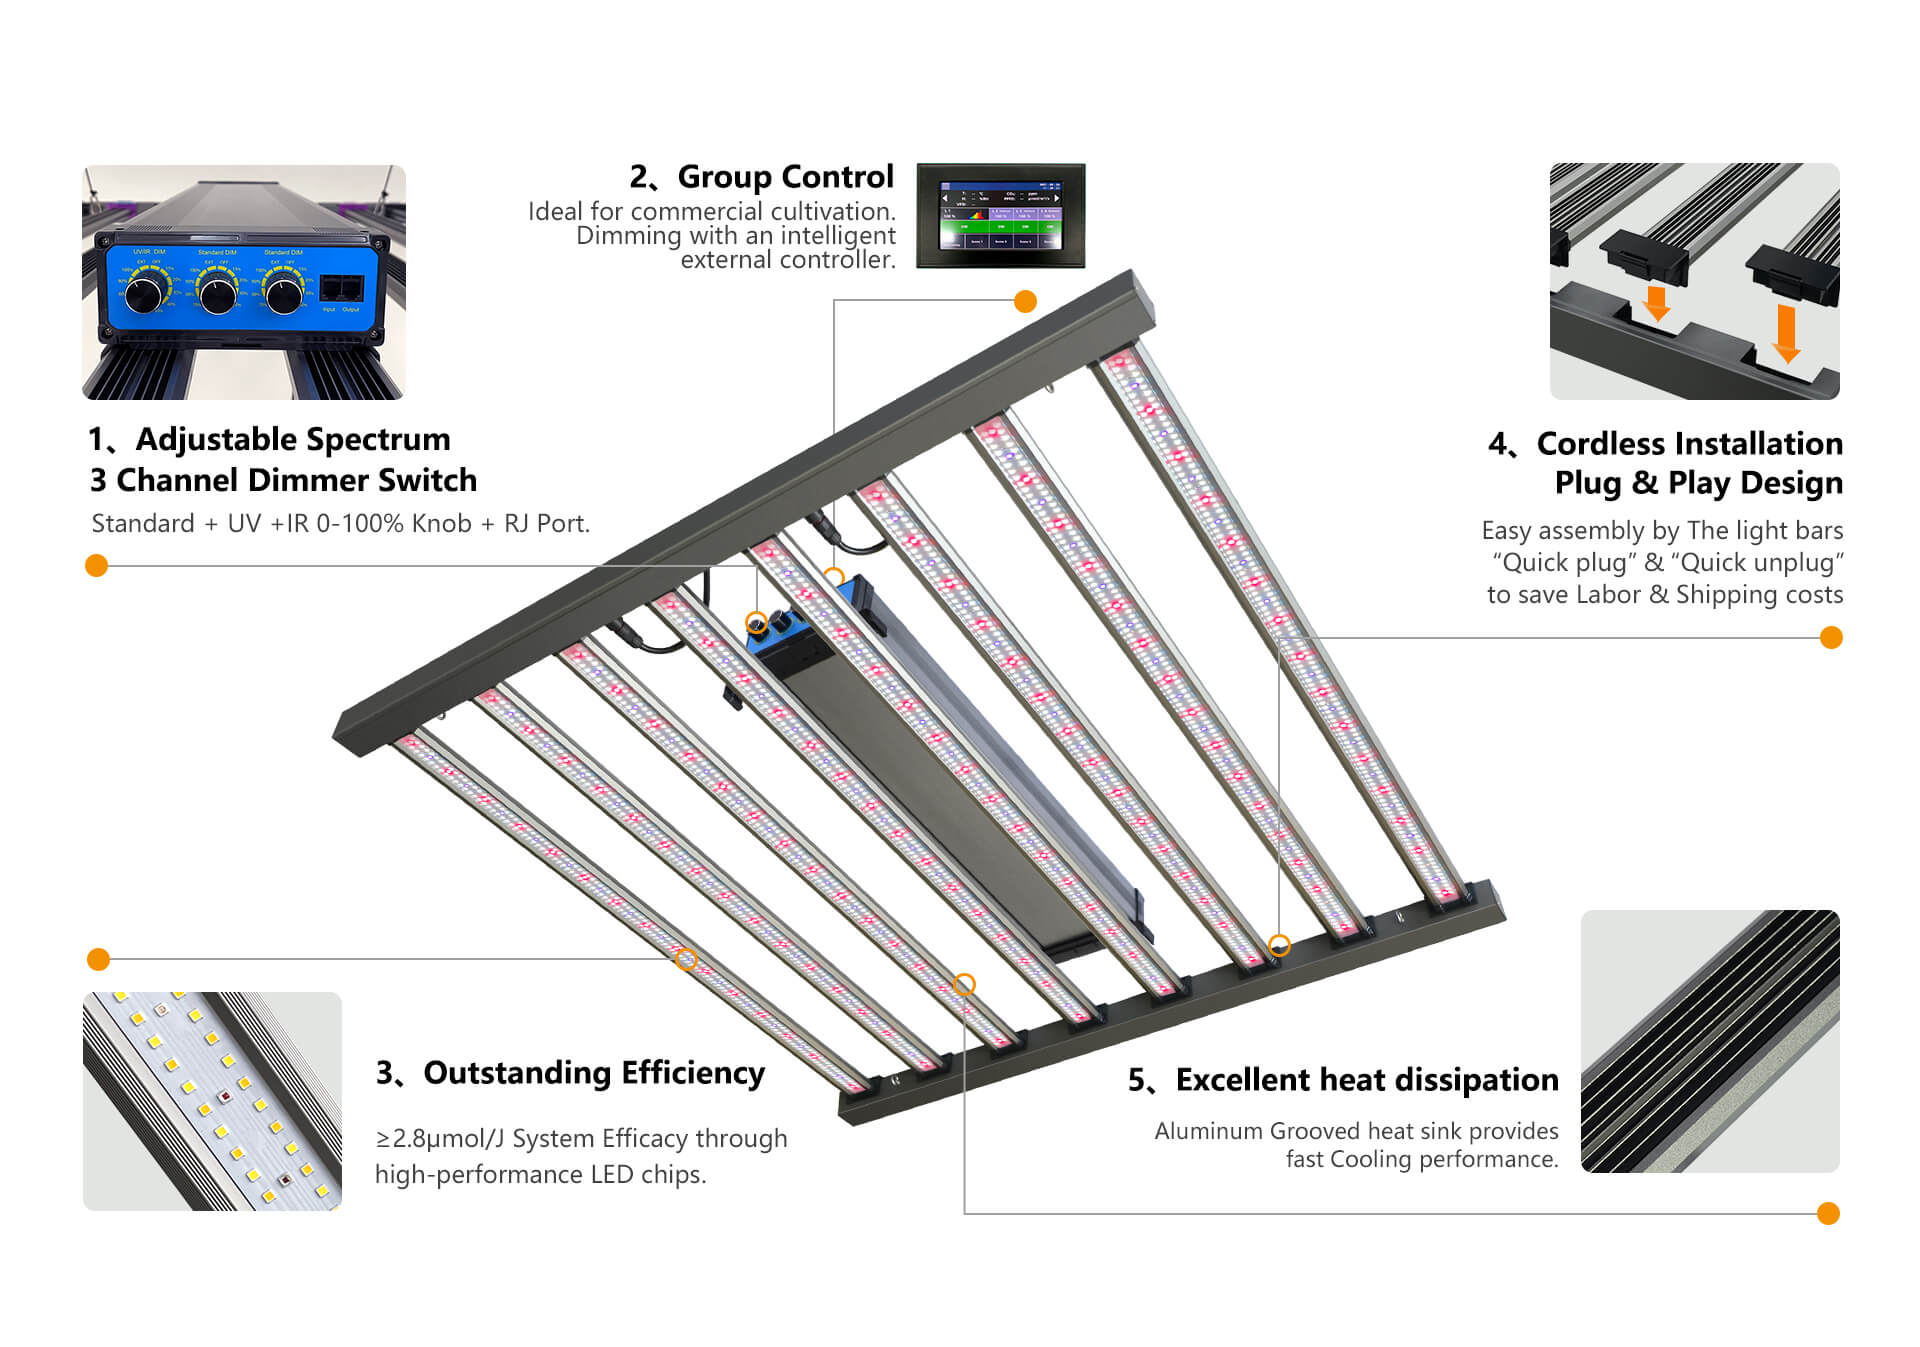 dcz series led grow light product features introduction